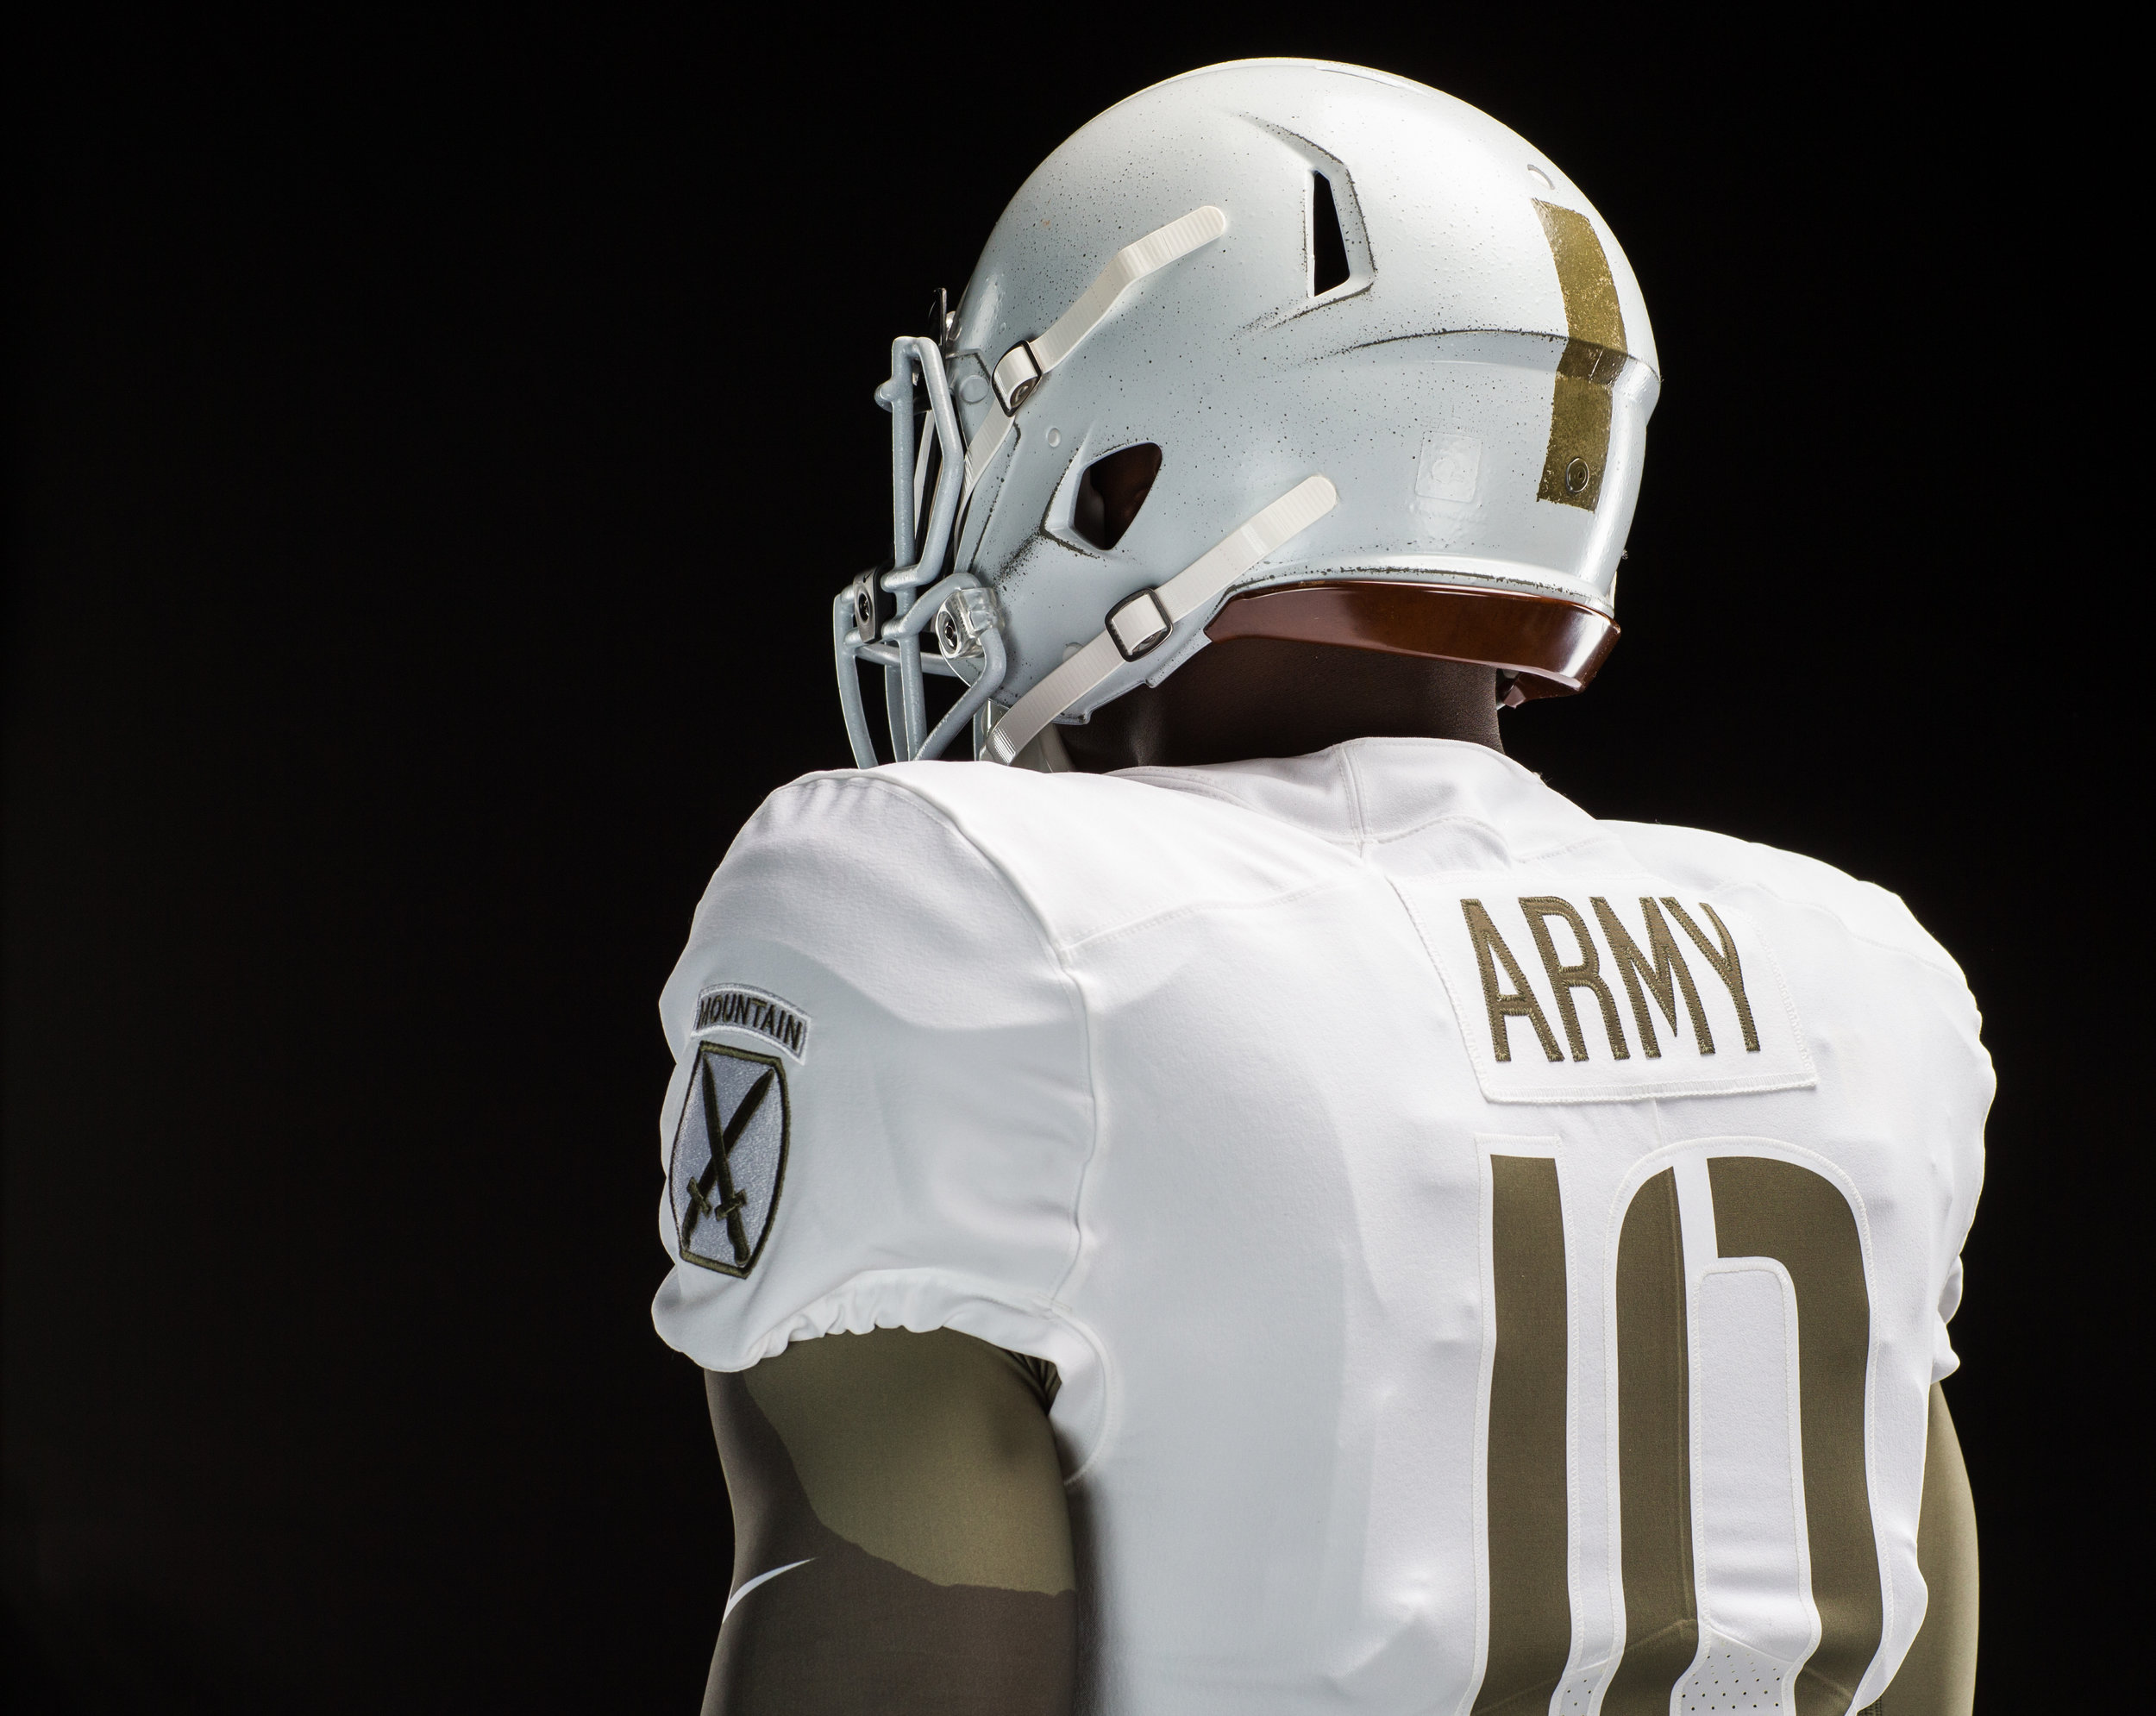 Army West Point Jerseys, Army Black Knights Football Uniforms